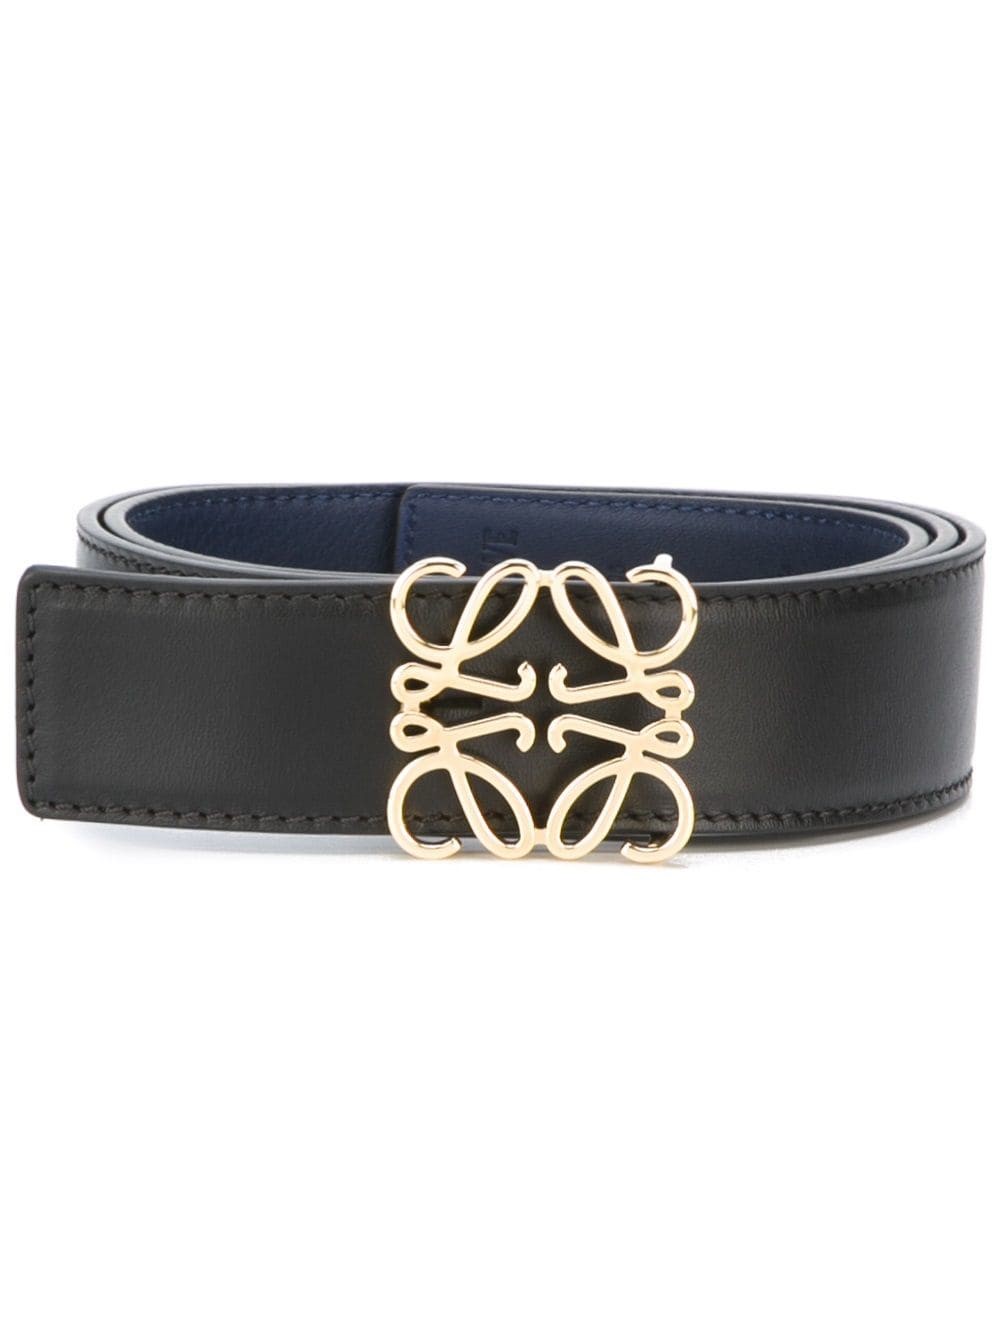 loewe ANAGRAM BELT available on montiboutique.com - 29028